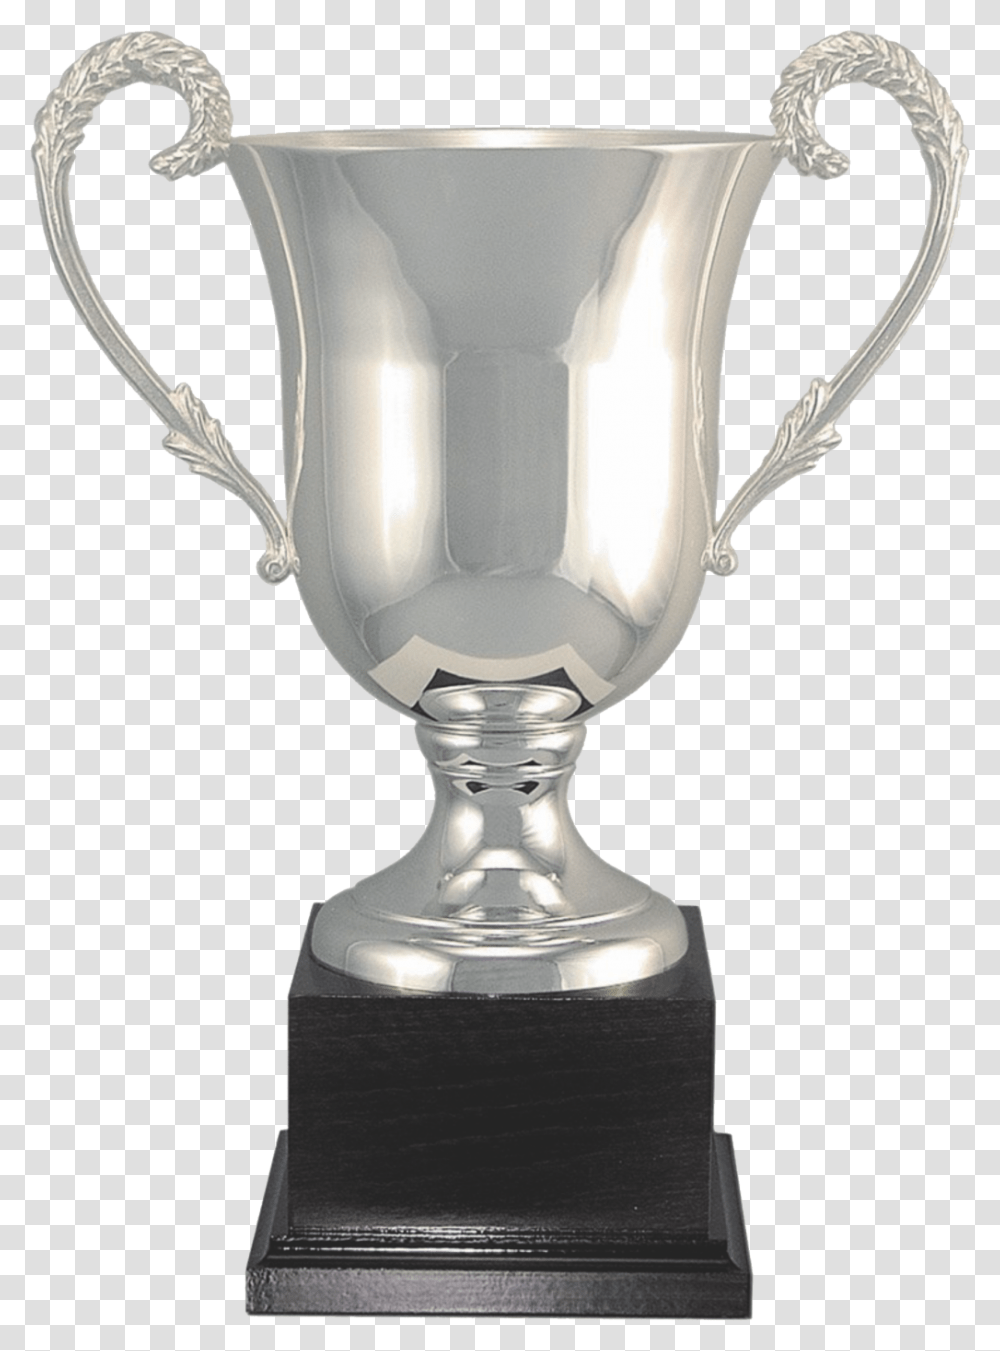 Kisspng Trophy Silver Award Cup Commemorative Plaque Silver Gold Plated Trophies, Lamp Transparent Png